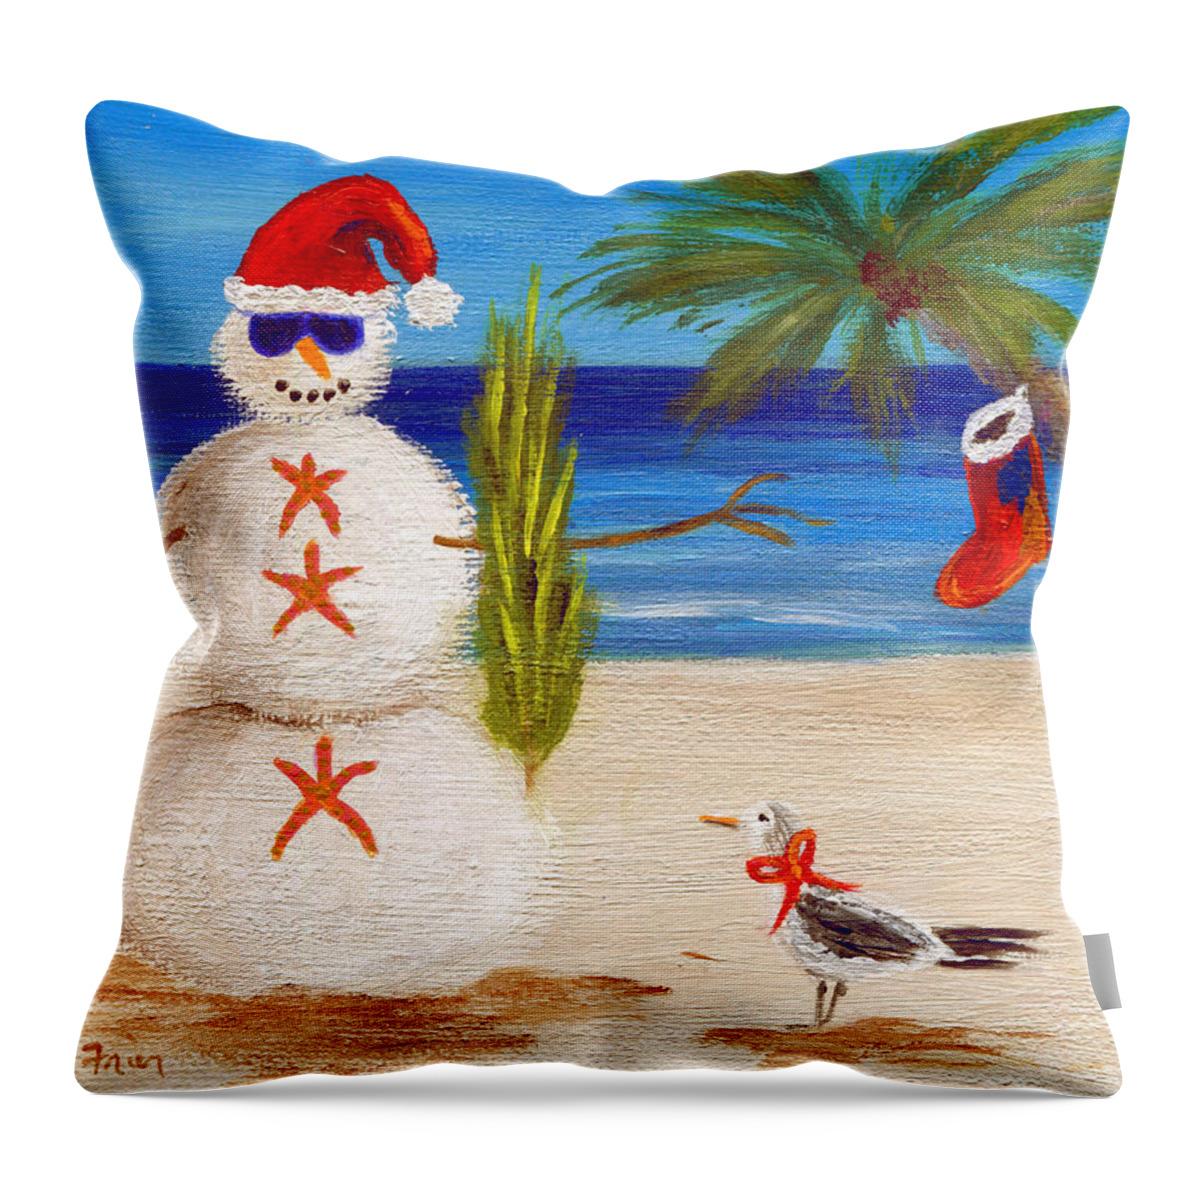 Christmas Throw Pillow featuring the painting Christmas Sandman by Jamie Frier